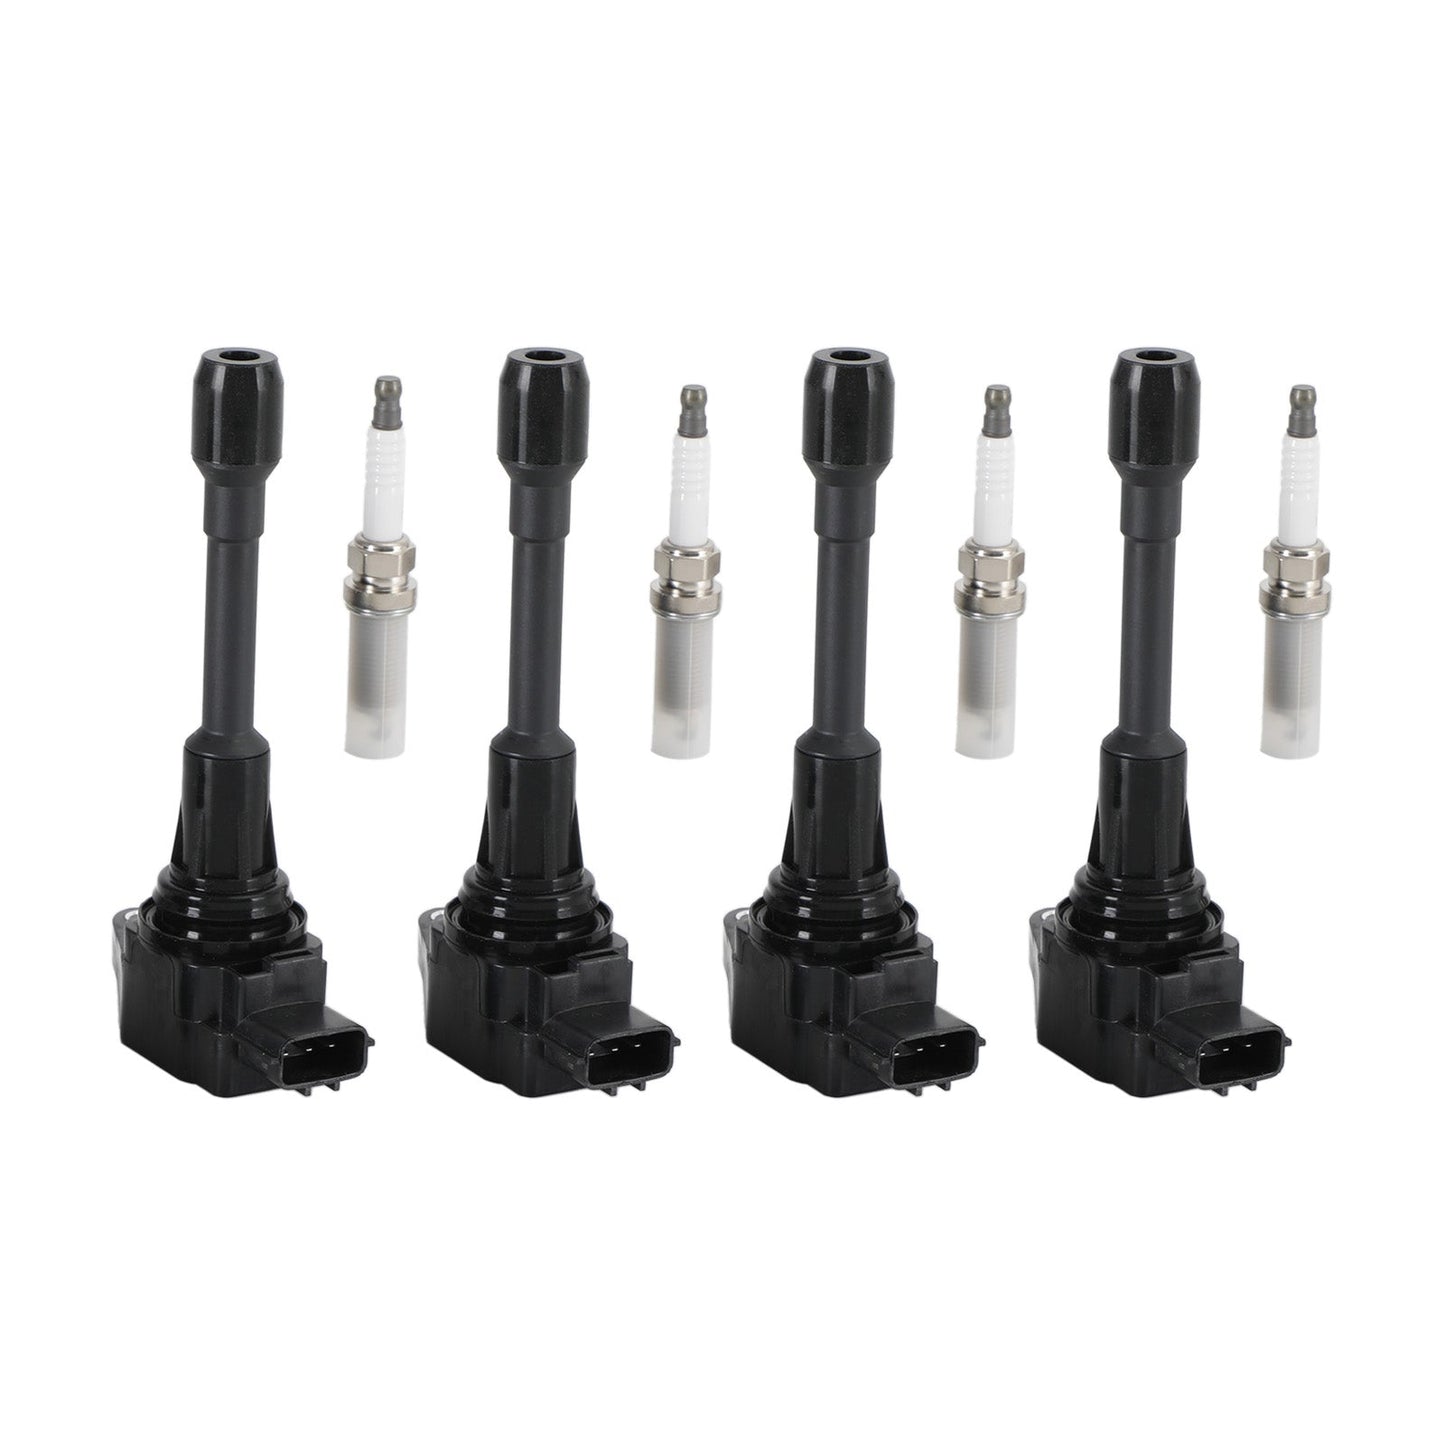 4PCS Ignition Coils Pack For Nissan Altima Sentra Rogue X-Trail Tiida 2.5L UF549